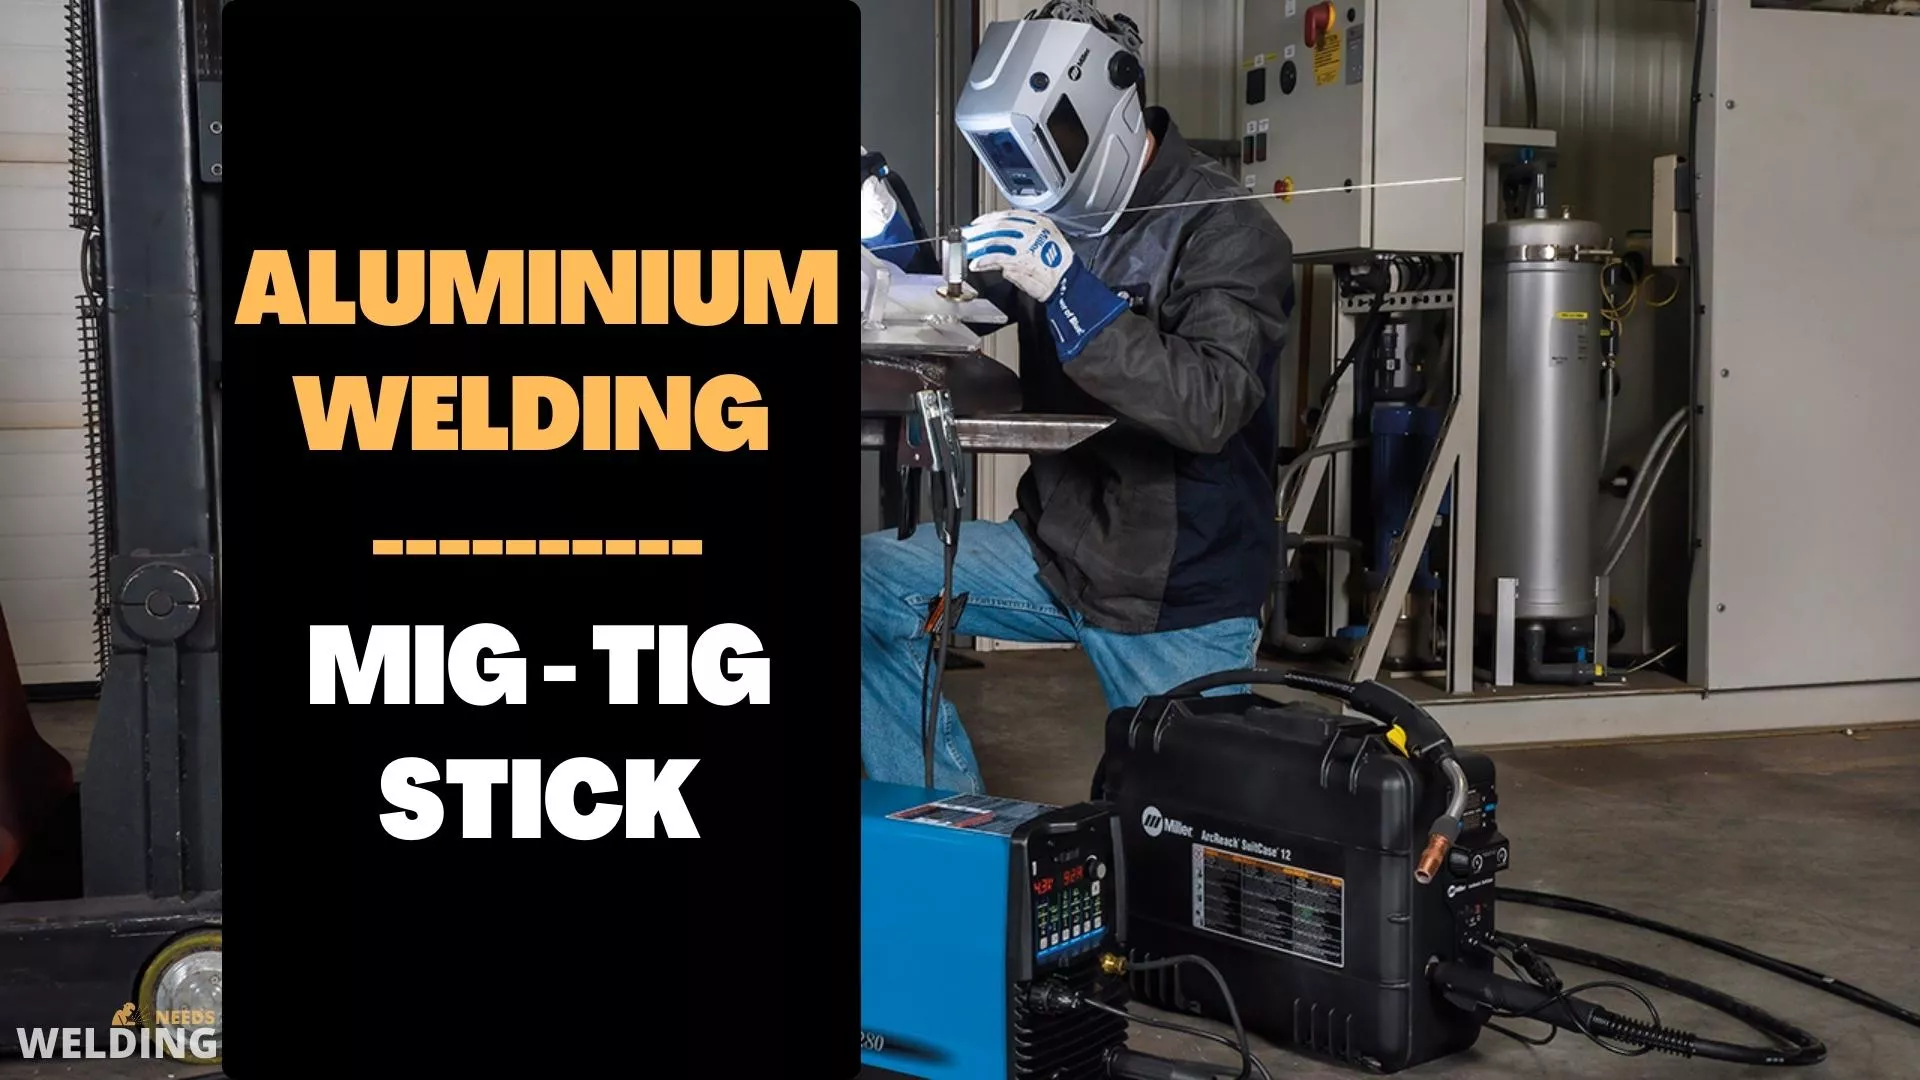 How to Weld Aluminum for MIG-TIG-Stick